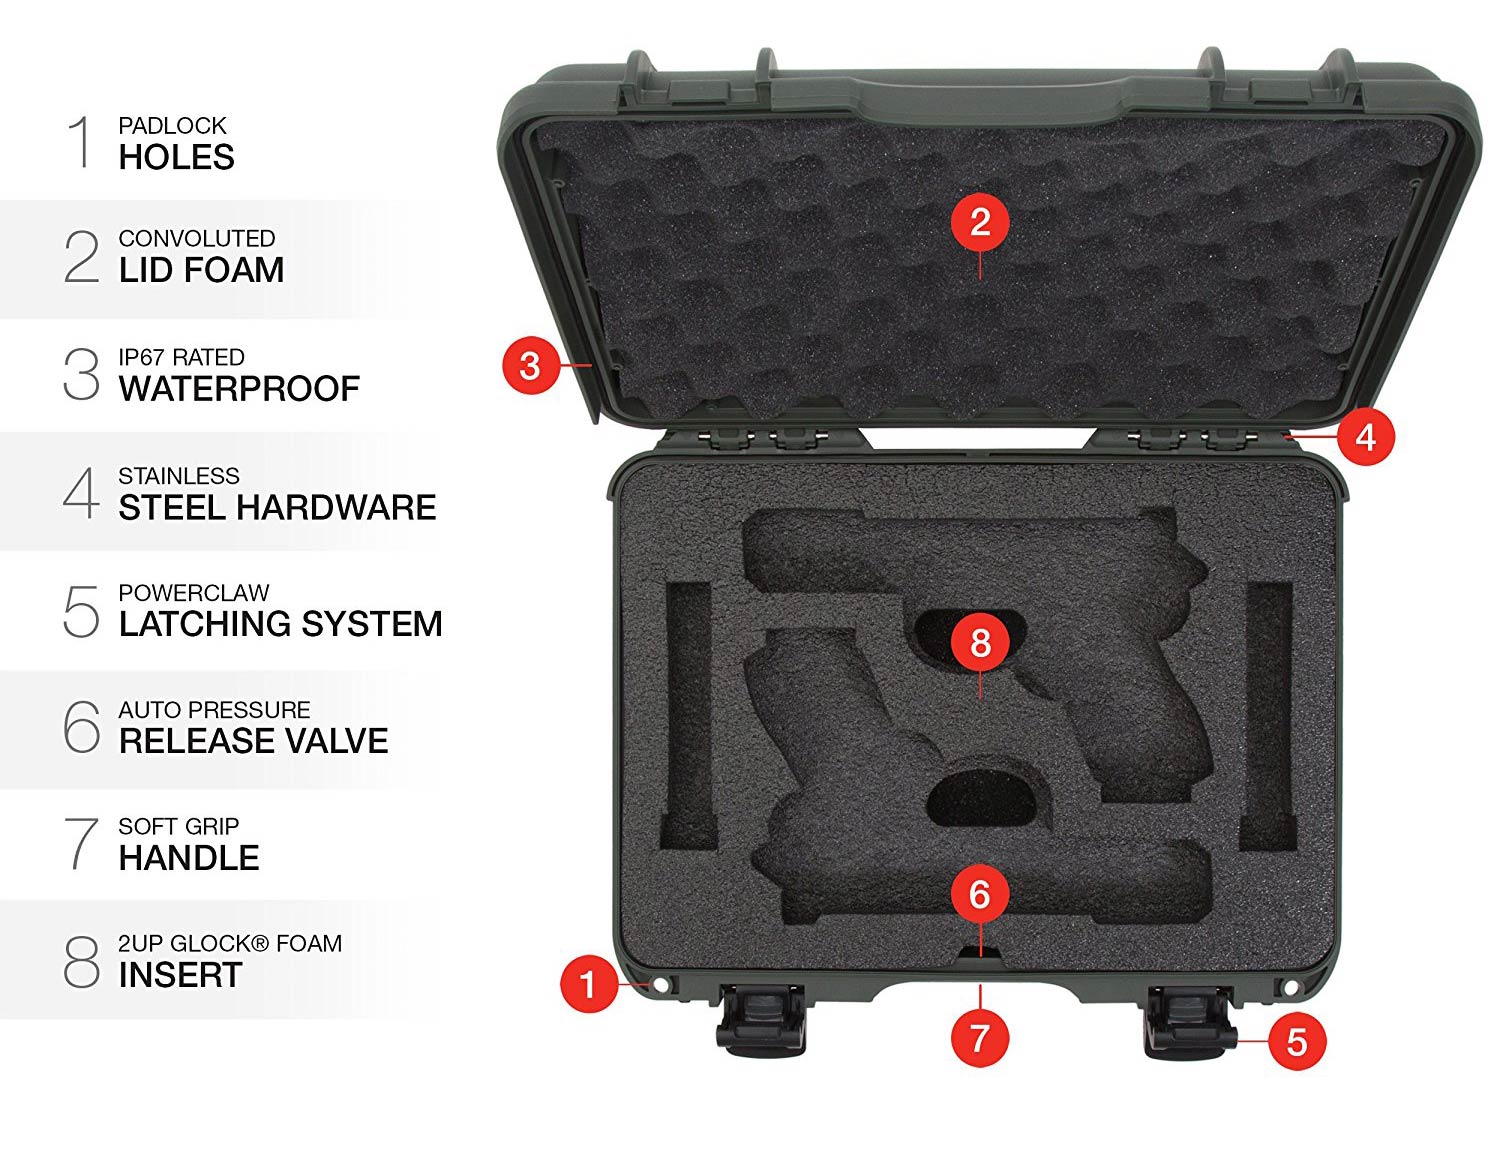 Features of the Nanuk 910 Glock® 2 Up Pistol Case